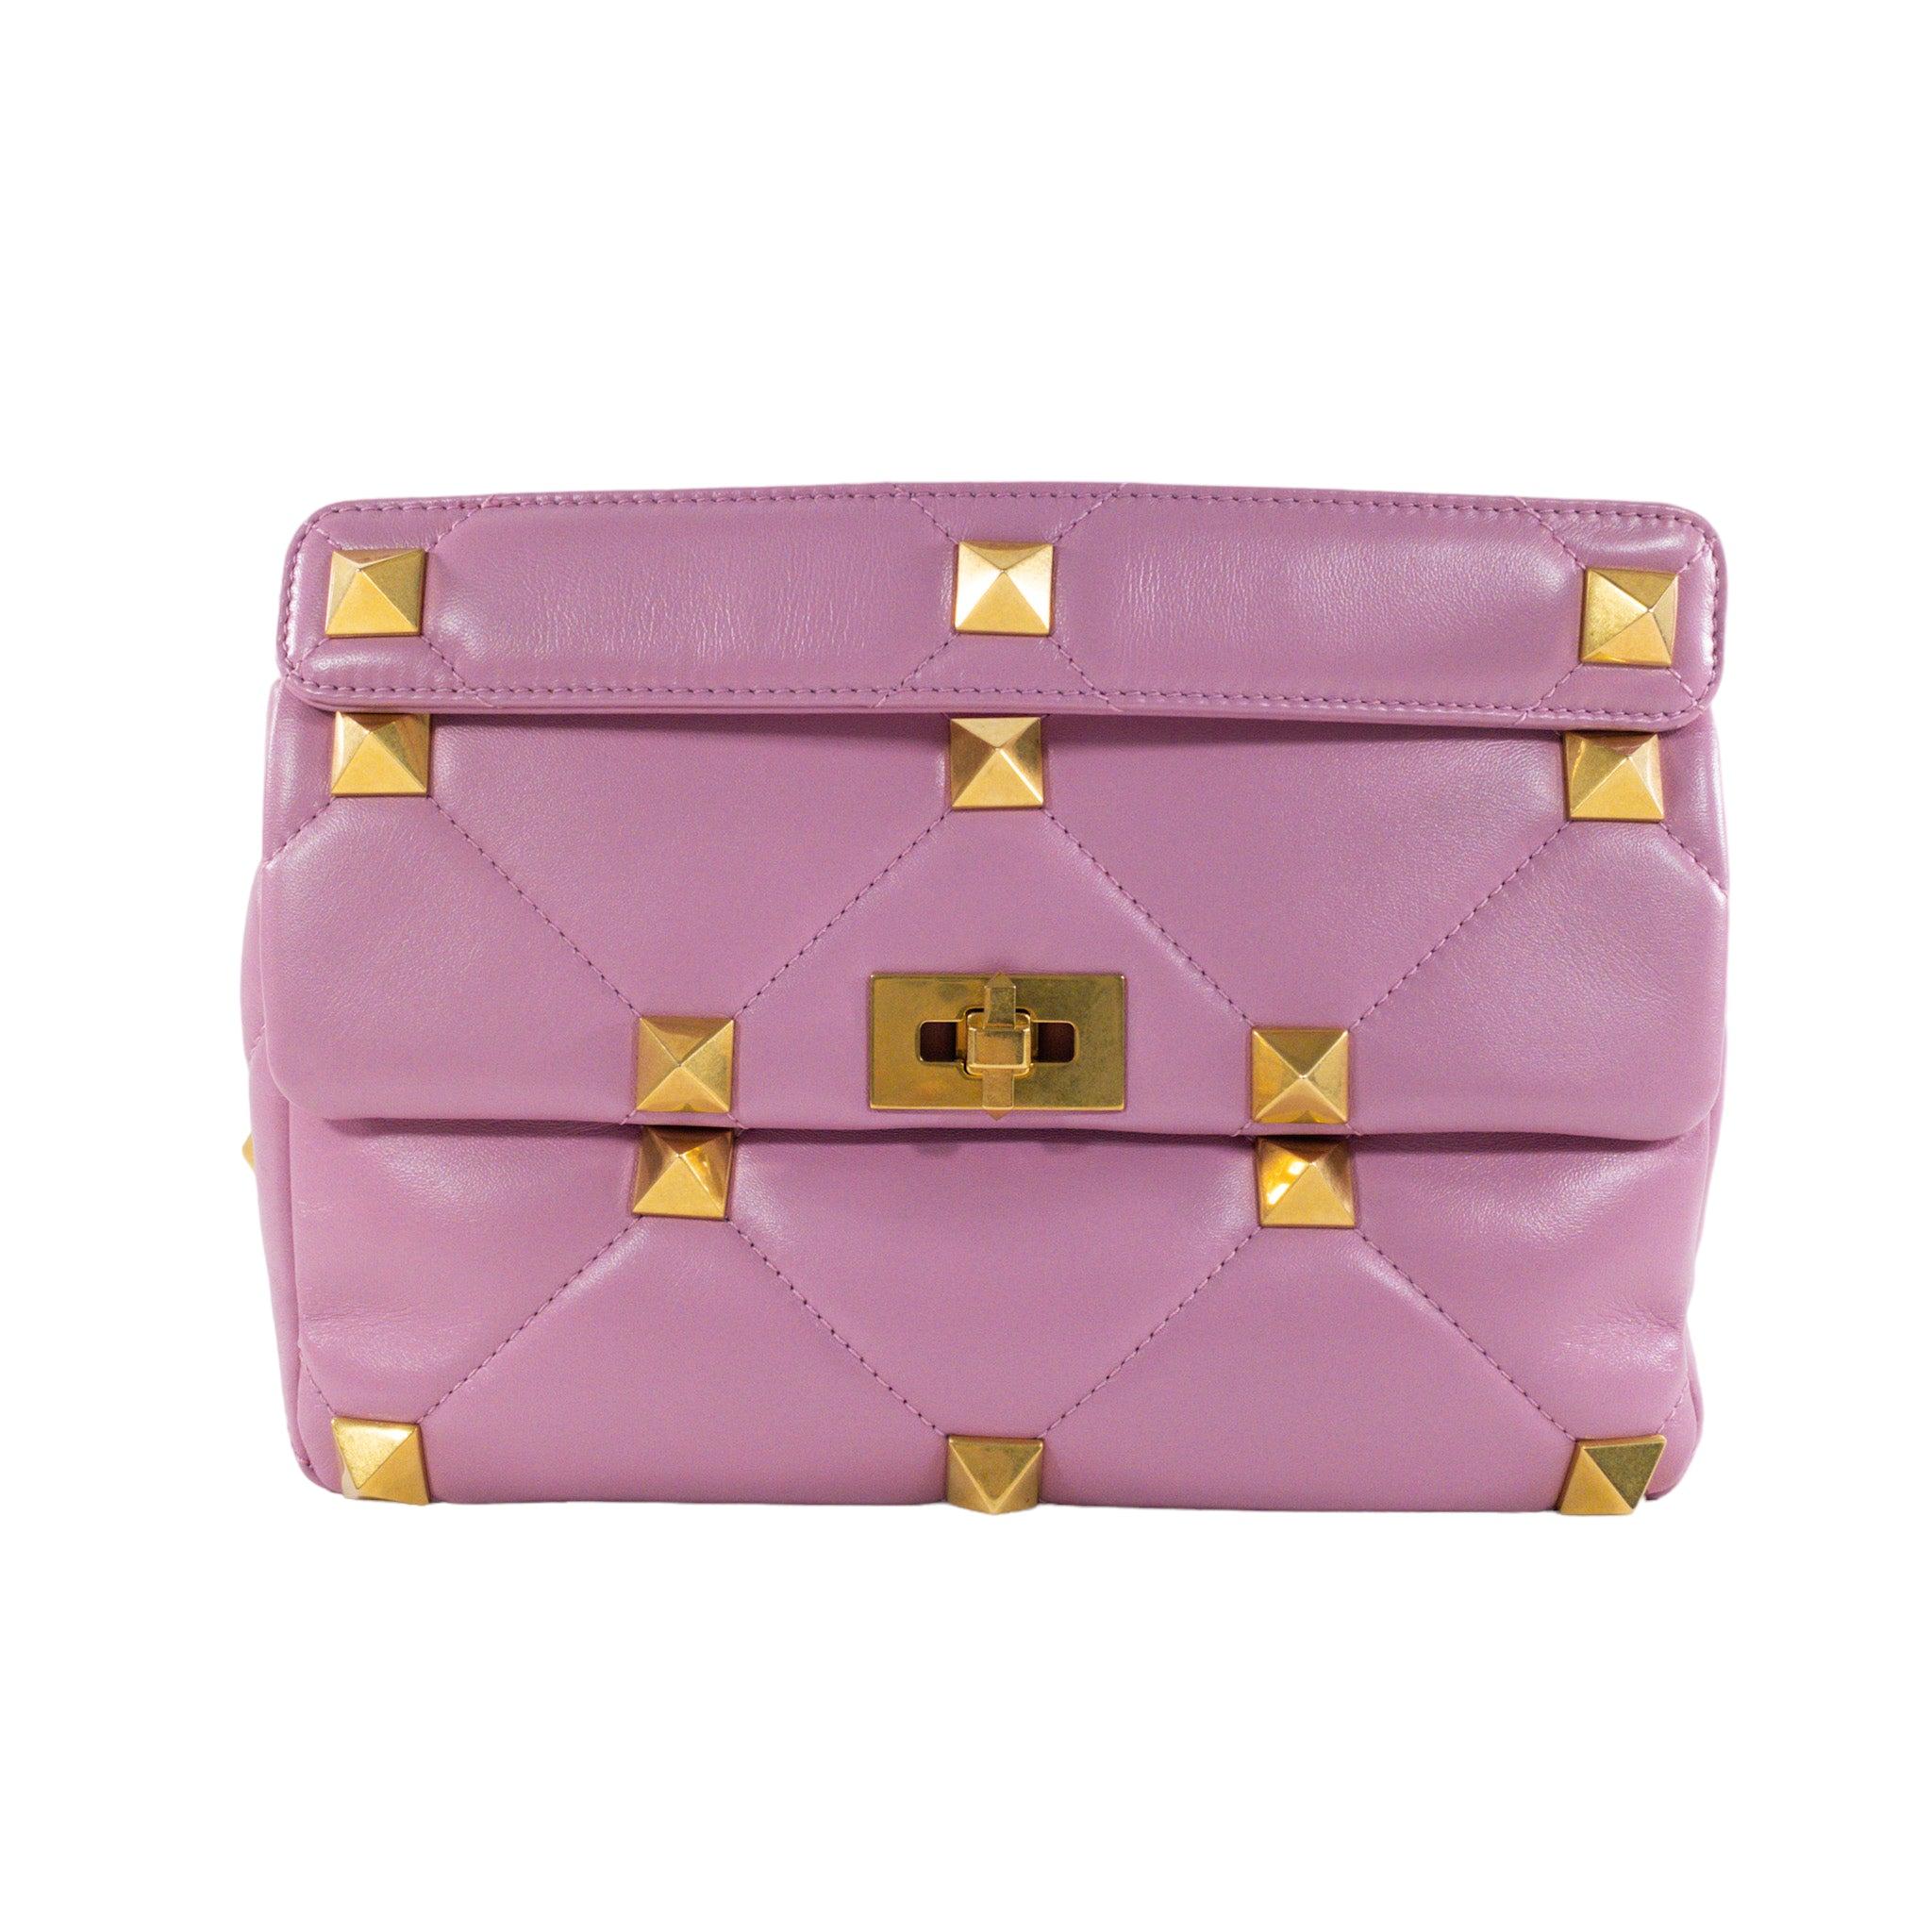 Valentino Pink Large Roman Stud Flap Bag

This is an authentic Valentino quilted Roman Stud Flap bag. Gold hardware Top handle with turn lock closure and detachable chain strap. Lined in leather, one interior zipped pocket. 

Additional